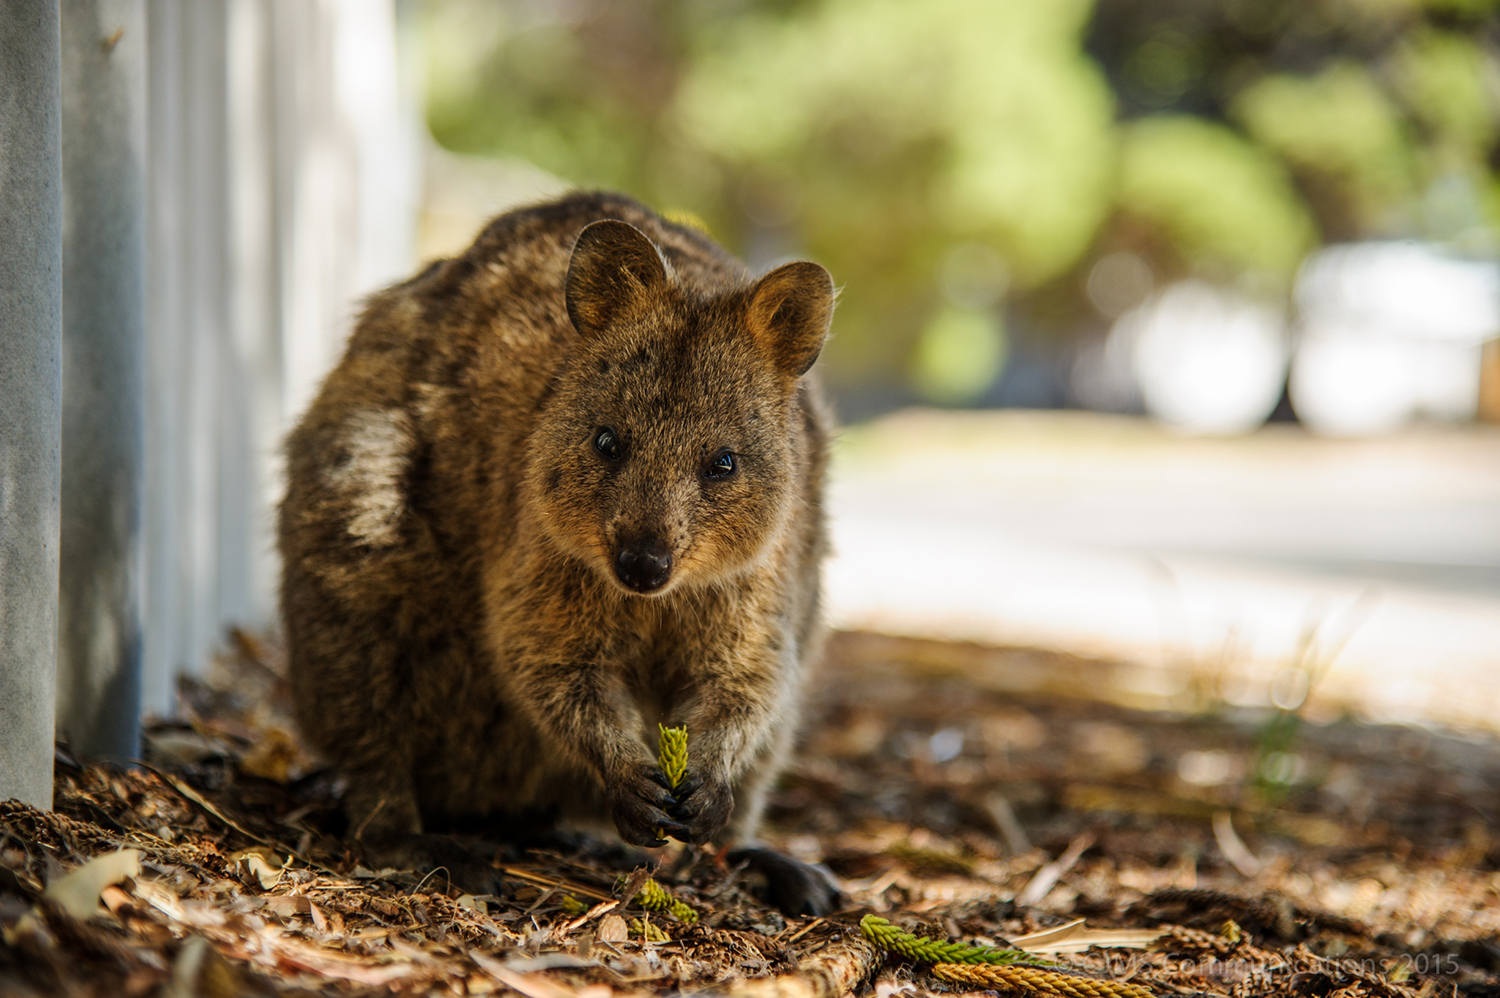 Fluffy, camera-ready quokkas can elicit ahhs from even the most jaded travellers - you have been warned. Image by Craig Siczak / CC BY-SA 2.0